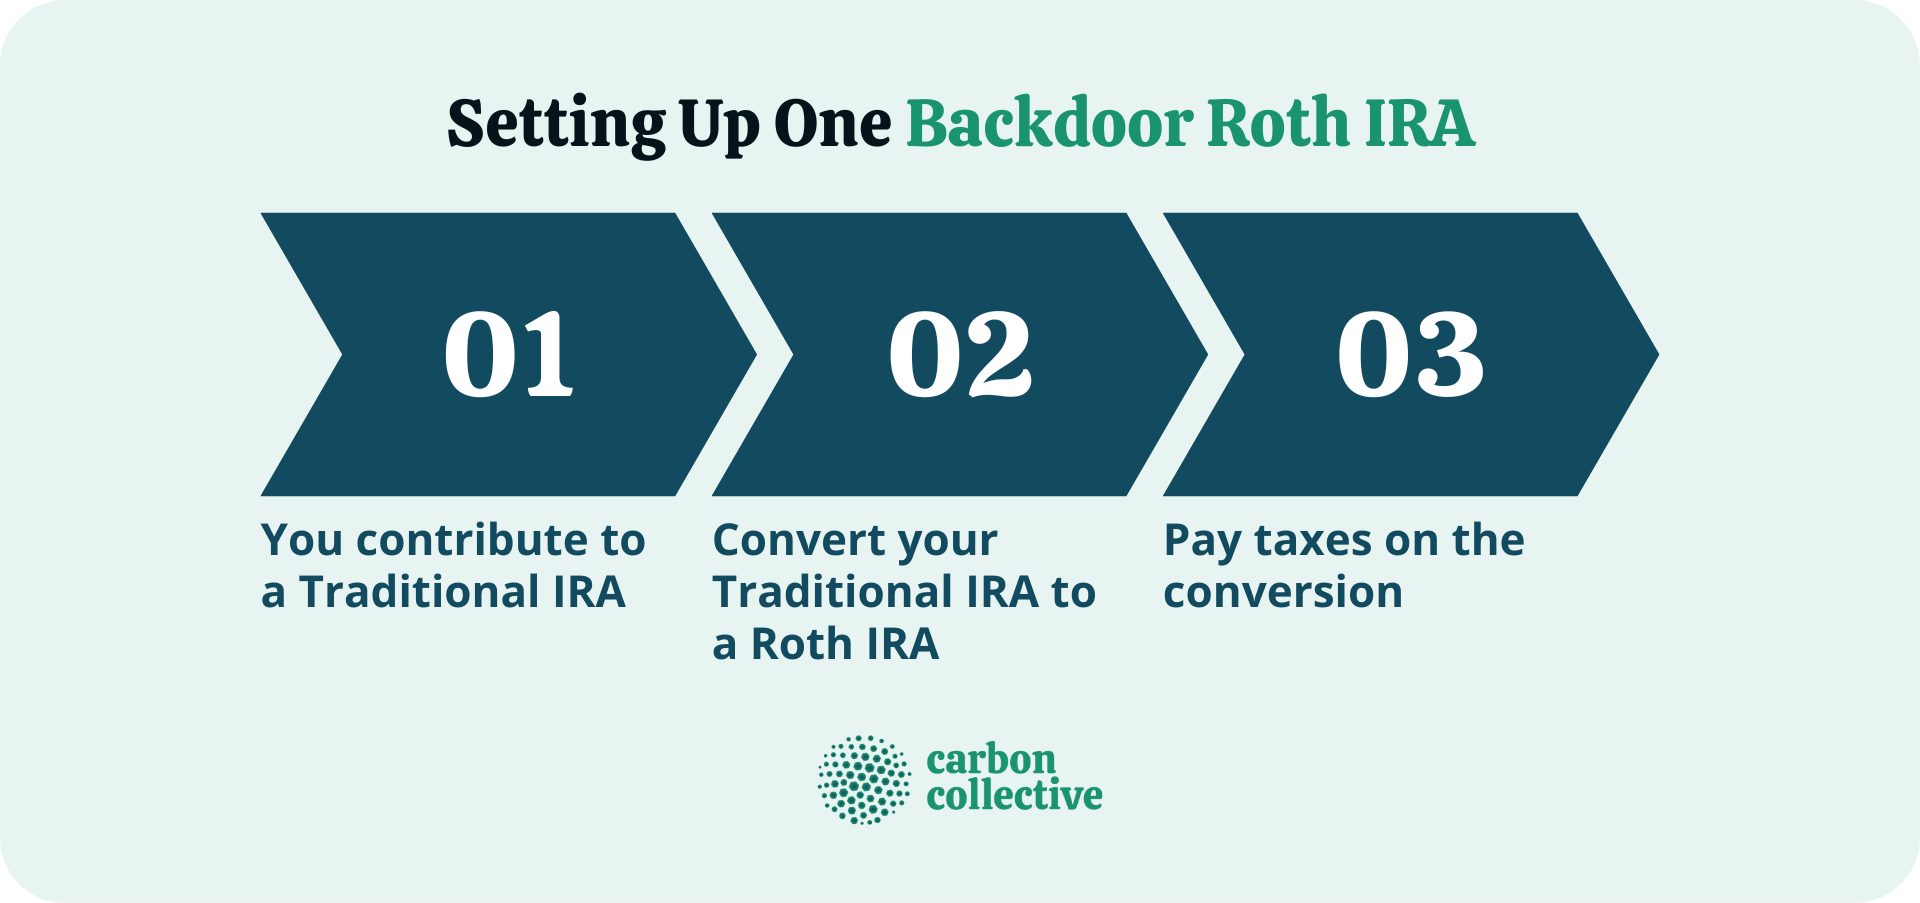 Backdoor Roth IRA Meaning, Setting up One, Advantages & Risks